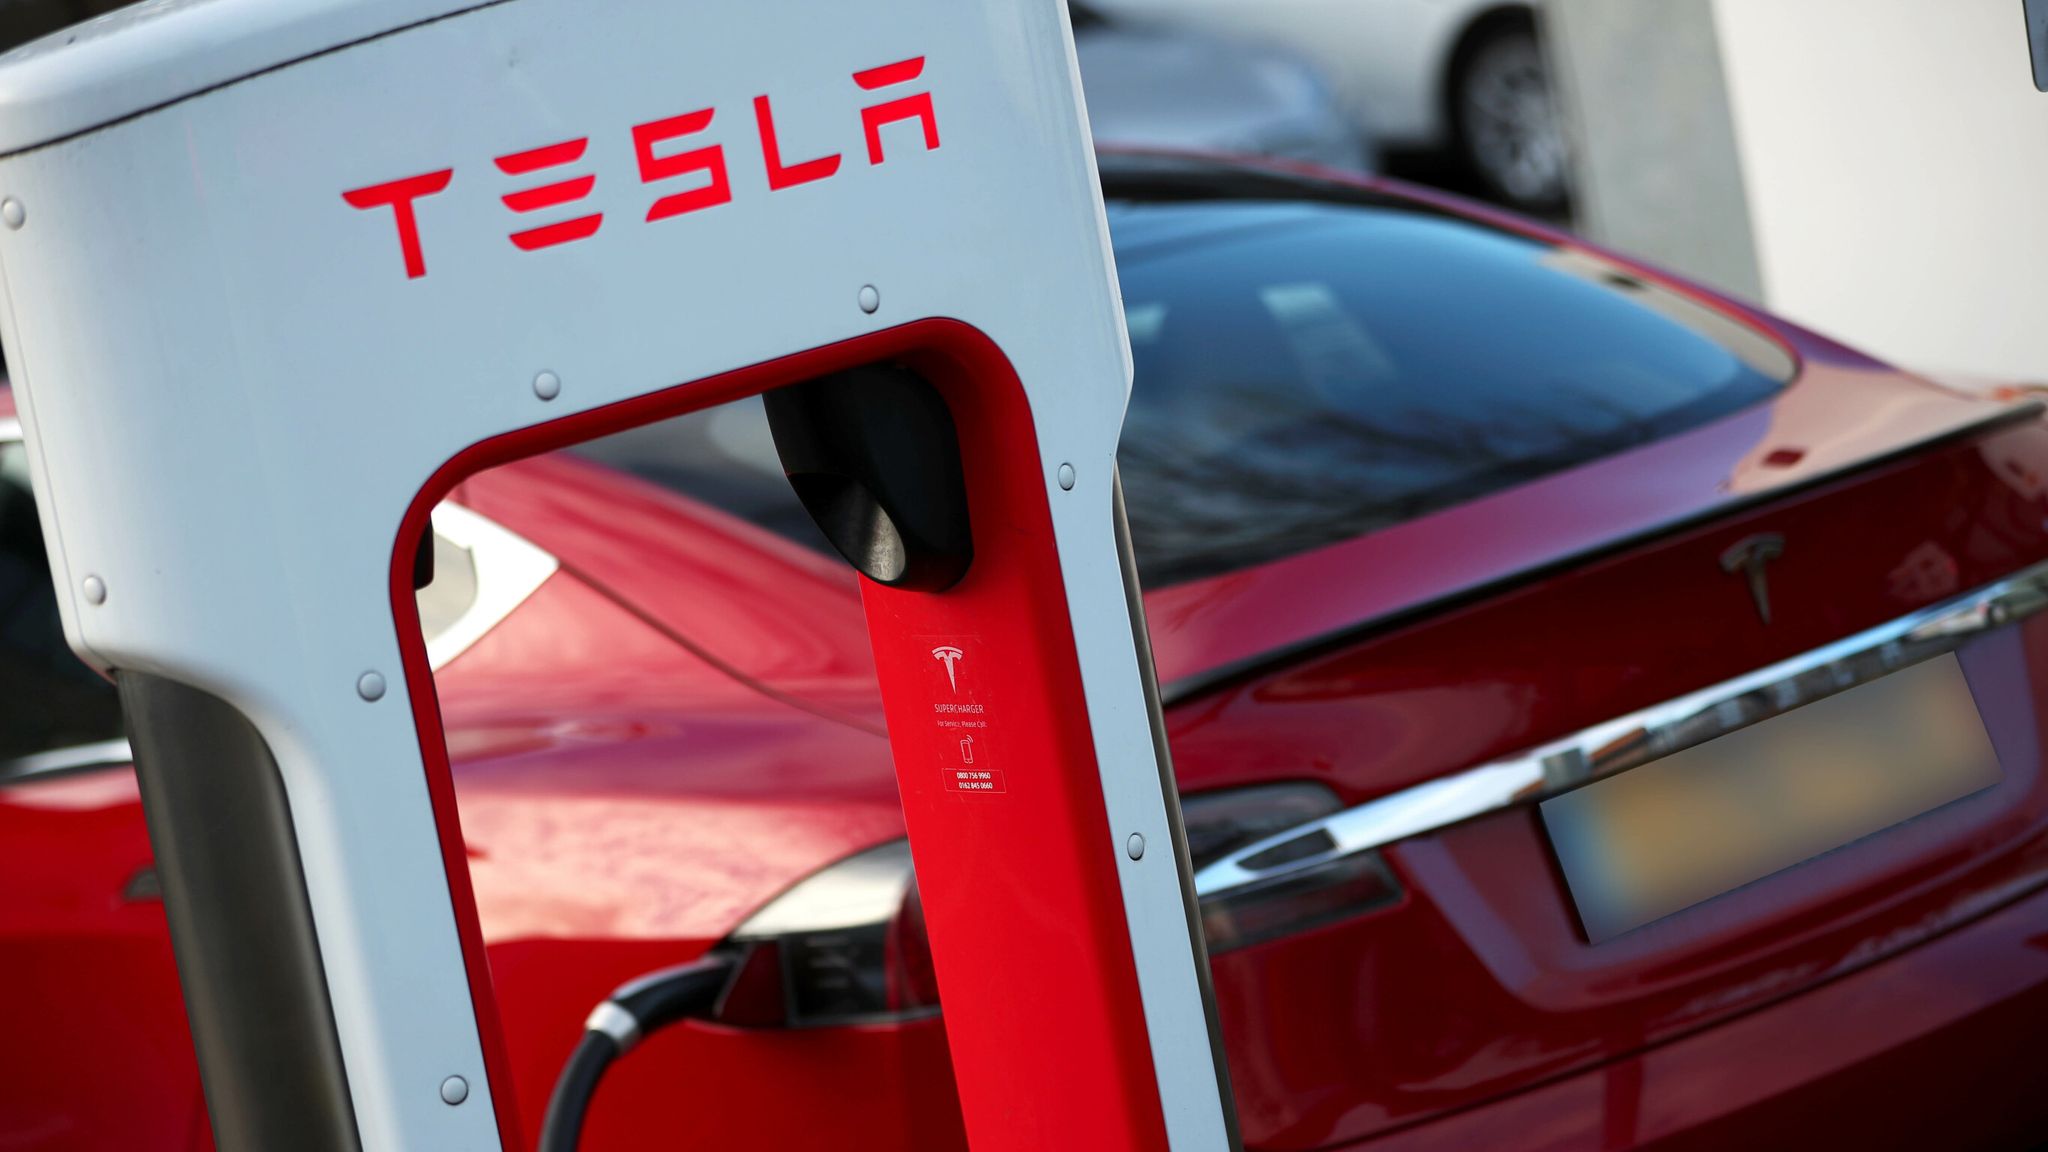 Tesla: Hundreds locked out of cars after server outage | Science &amp; Tech News | Sky News